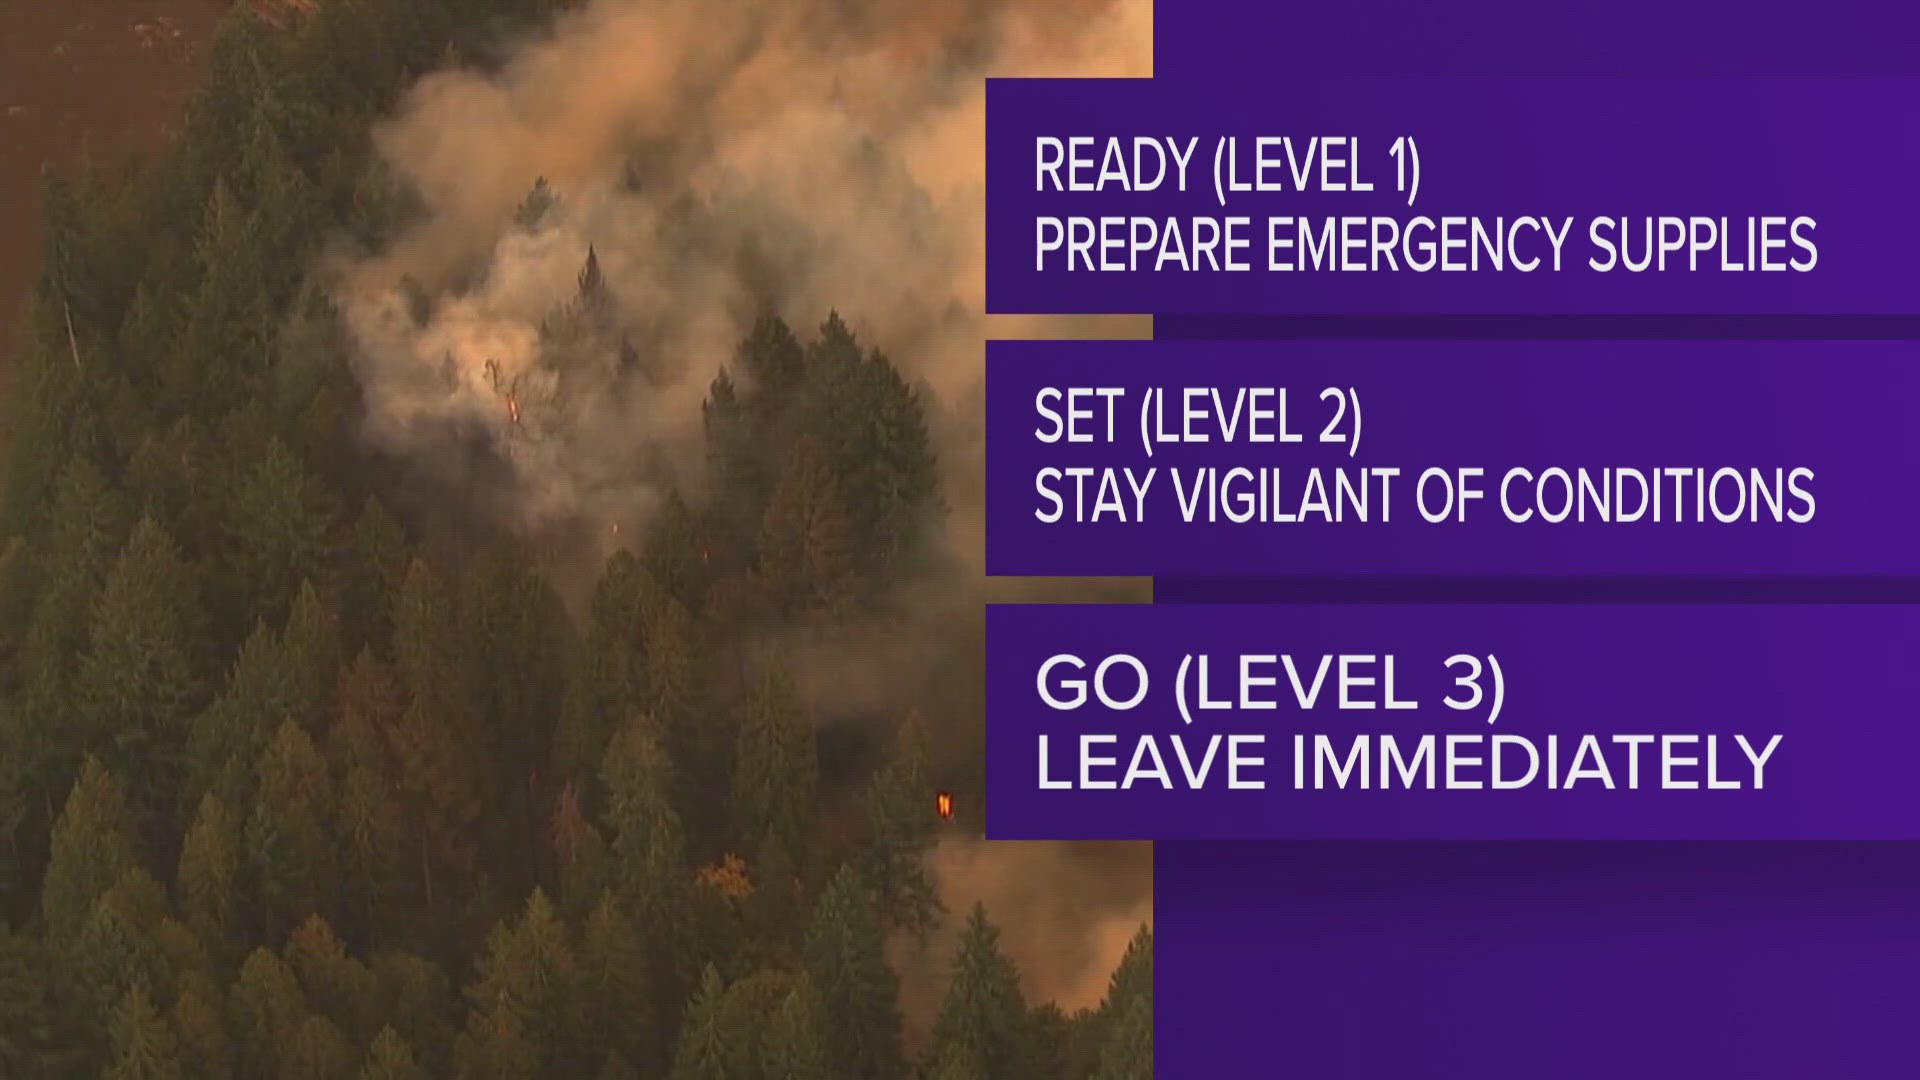 Kootenai County is now adopting the "Ready, Set, Go" model to help people better understand the urgency of wildfires.